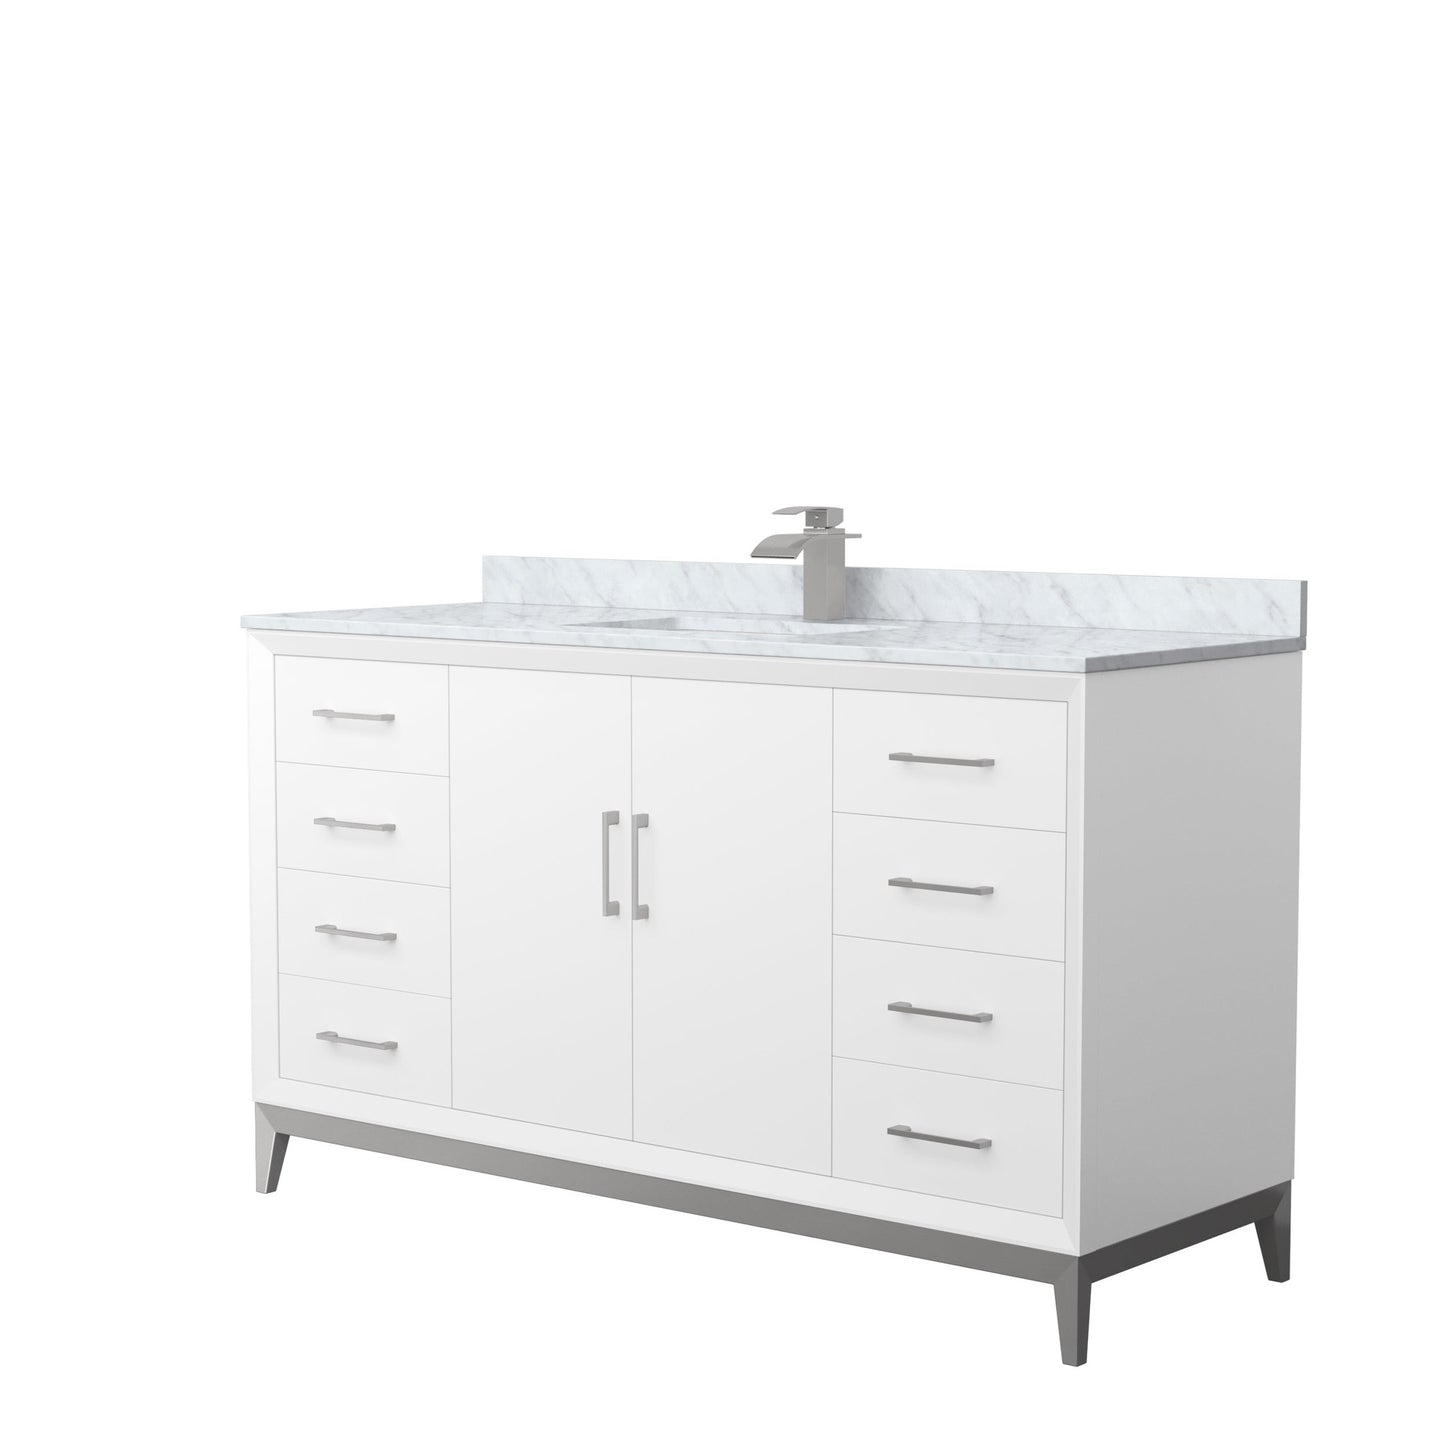 Wyndham Collection Amici 60" Single Bathroom Vanity in White, White Carrara Marble Countertop, Undermount Square Sink, Brushed Nickel Trim